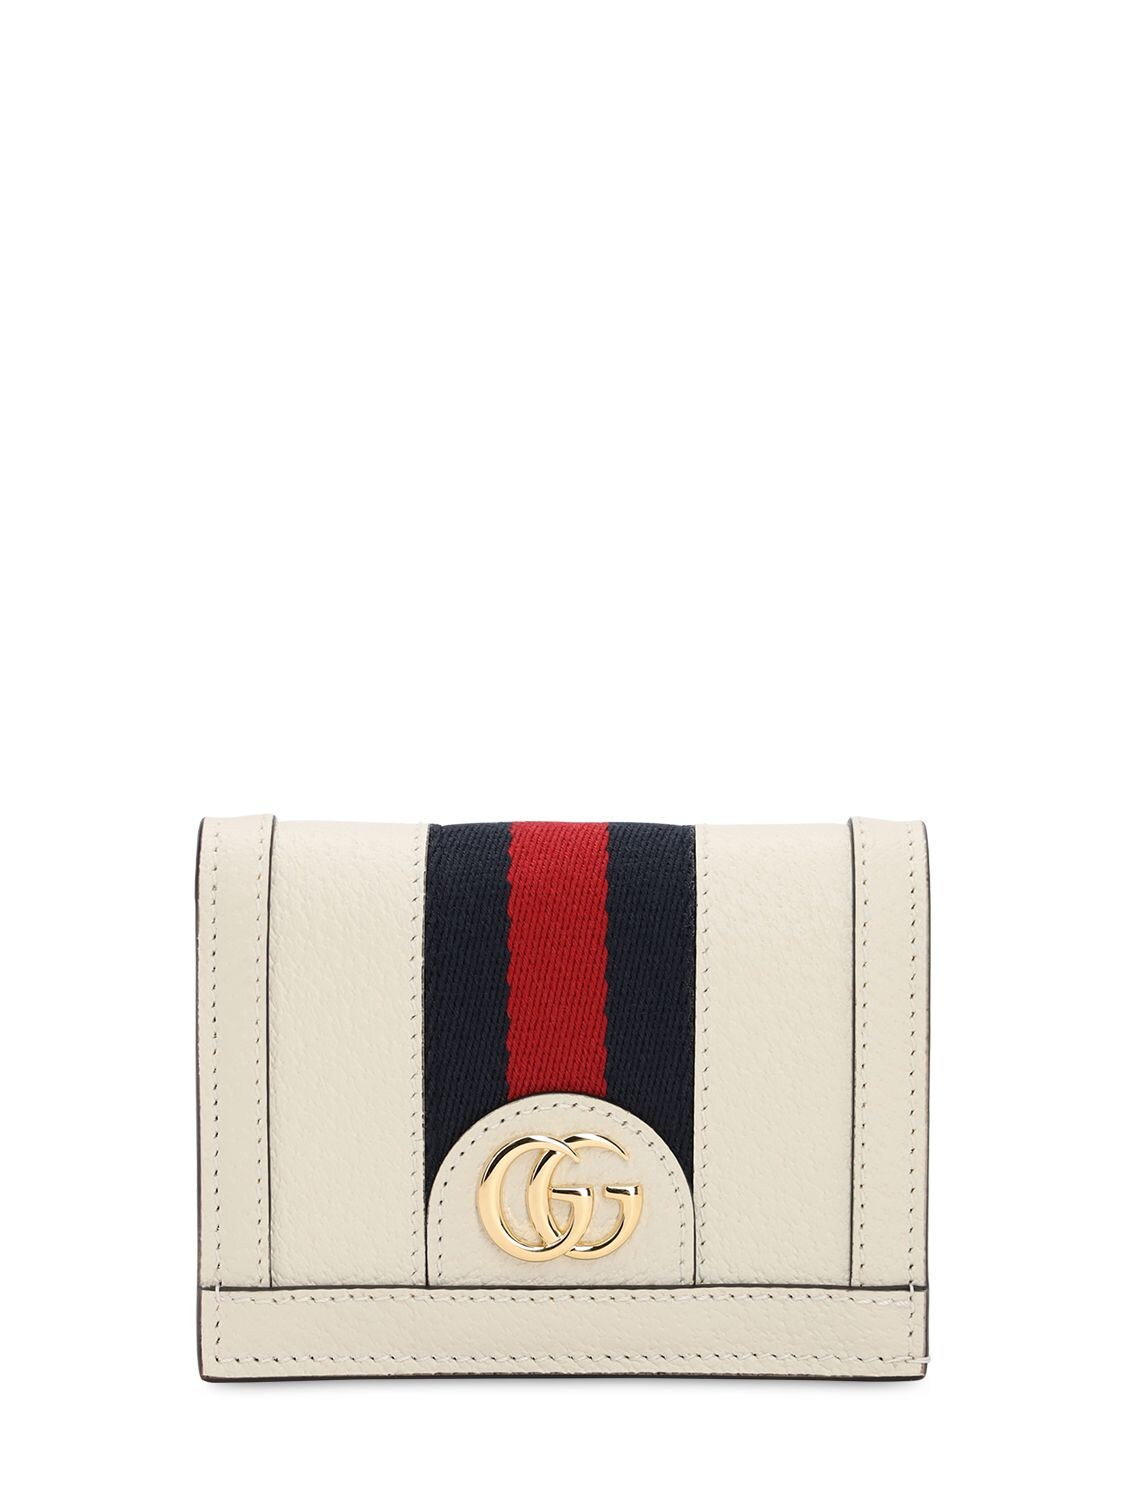 GUCCI OPHIDIA LEATHER SMALL WALLET,71IXHU041-ODQ1NA2